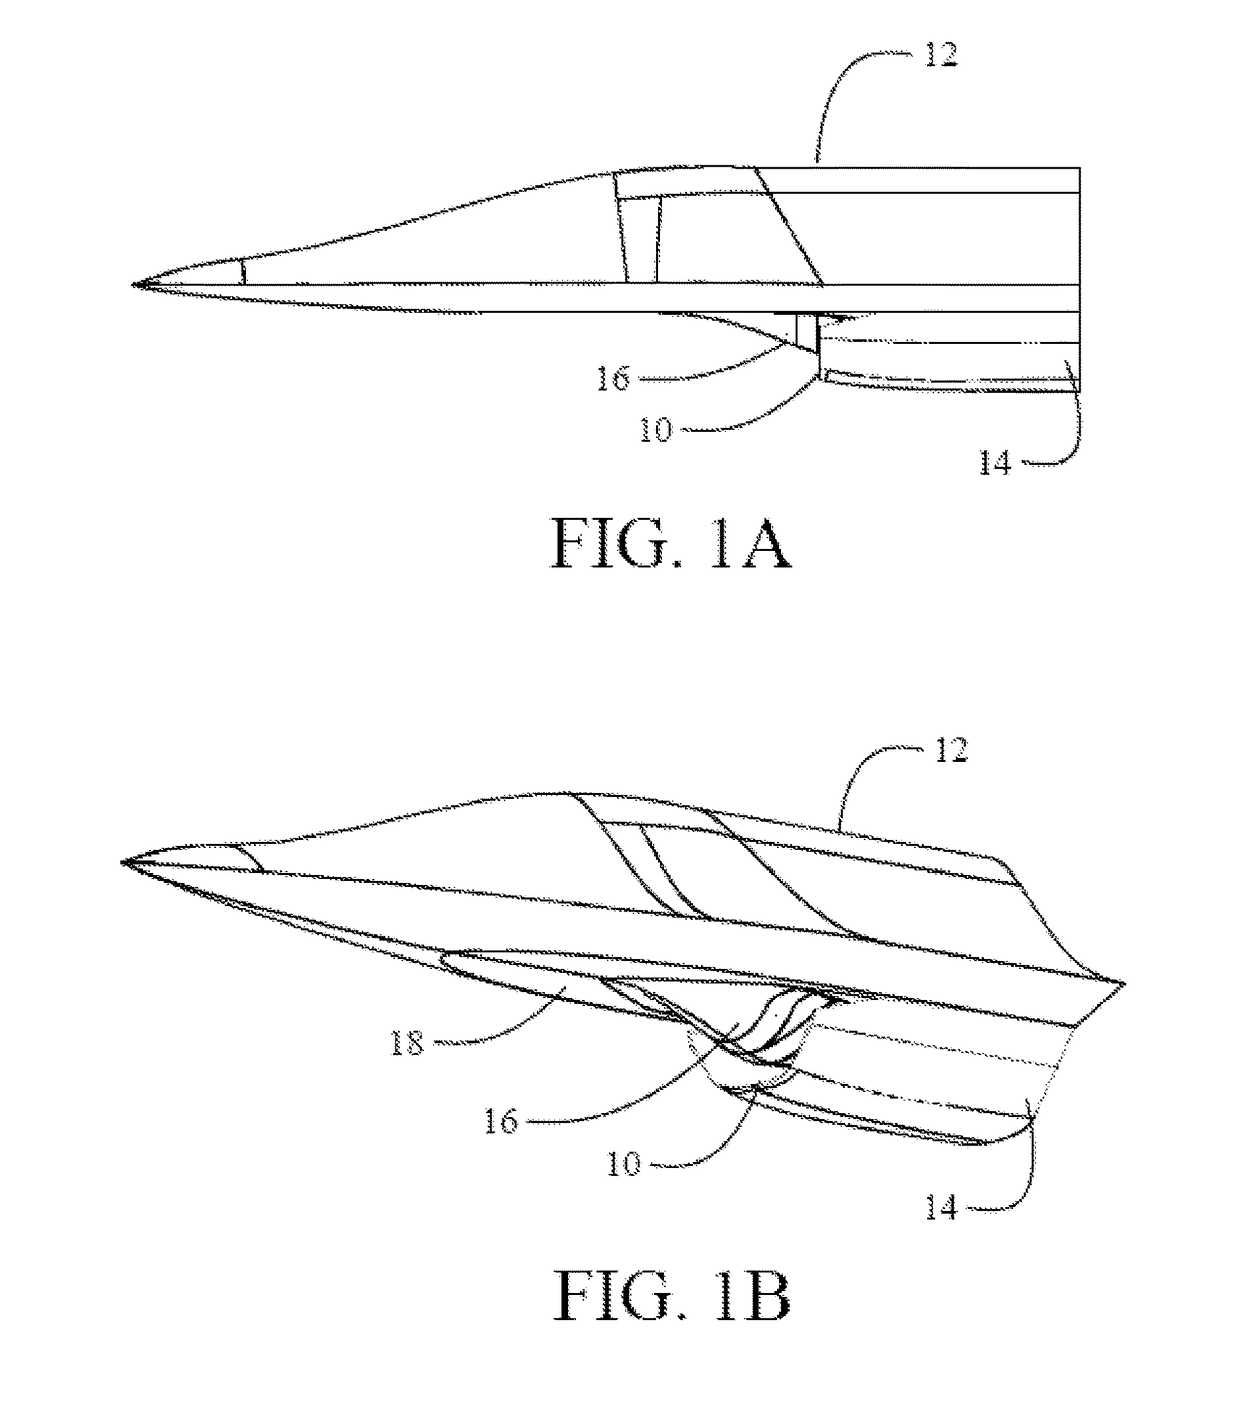 Variable-capture supersonic inlet